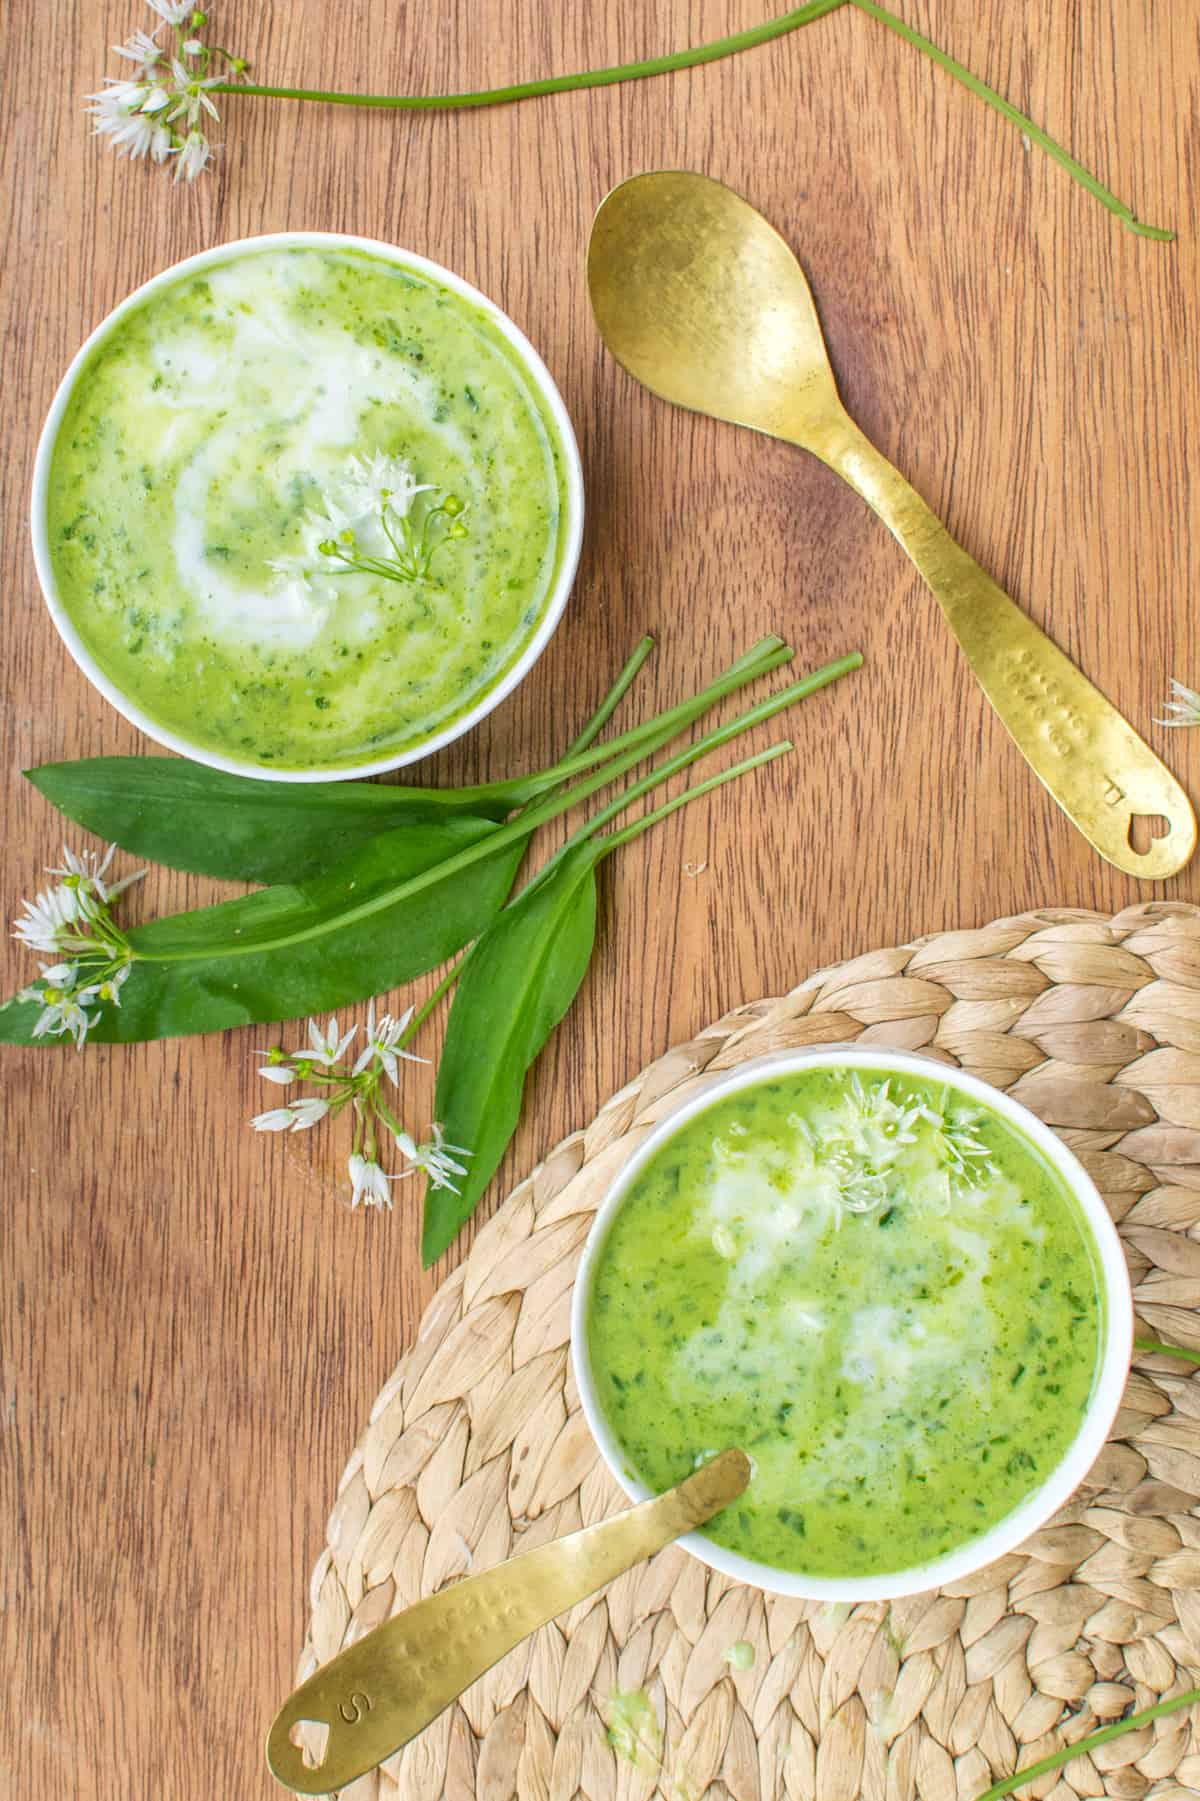 Two bowls of green soup, one of them with a spoon in it. Between the bowls some fresh wild garlic leaves and flowers.